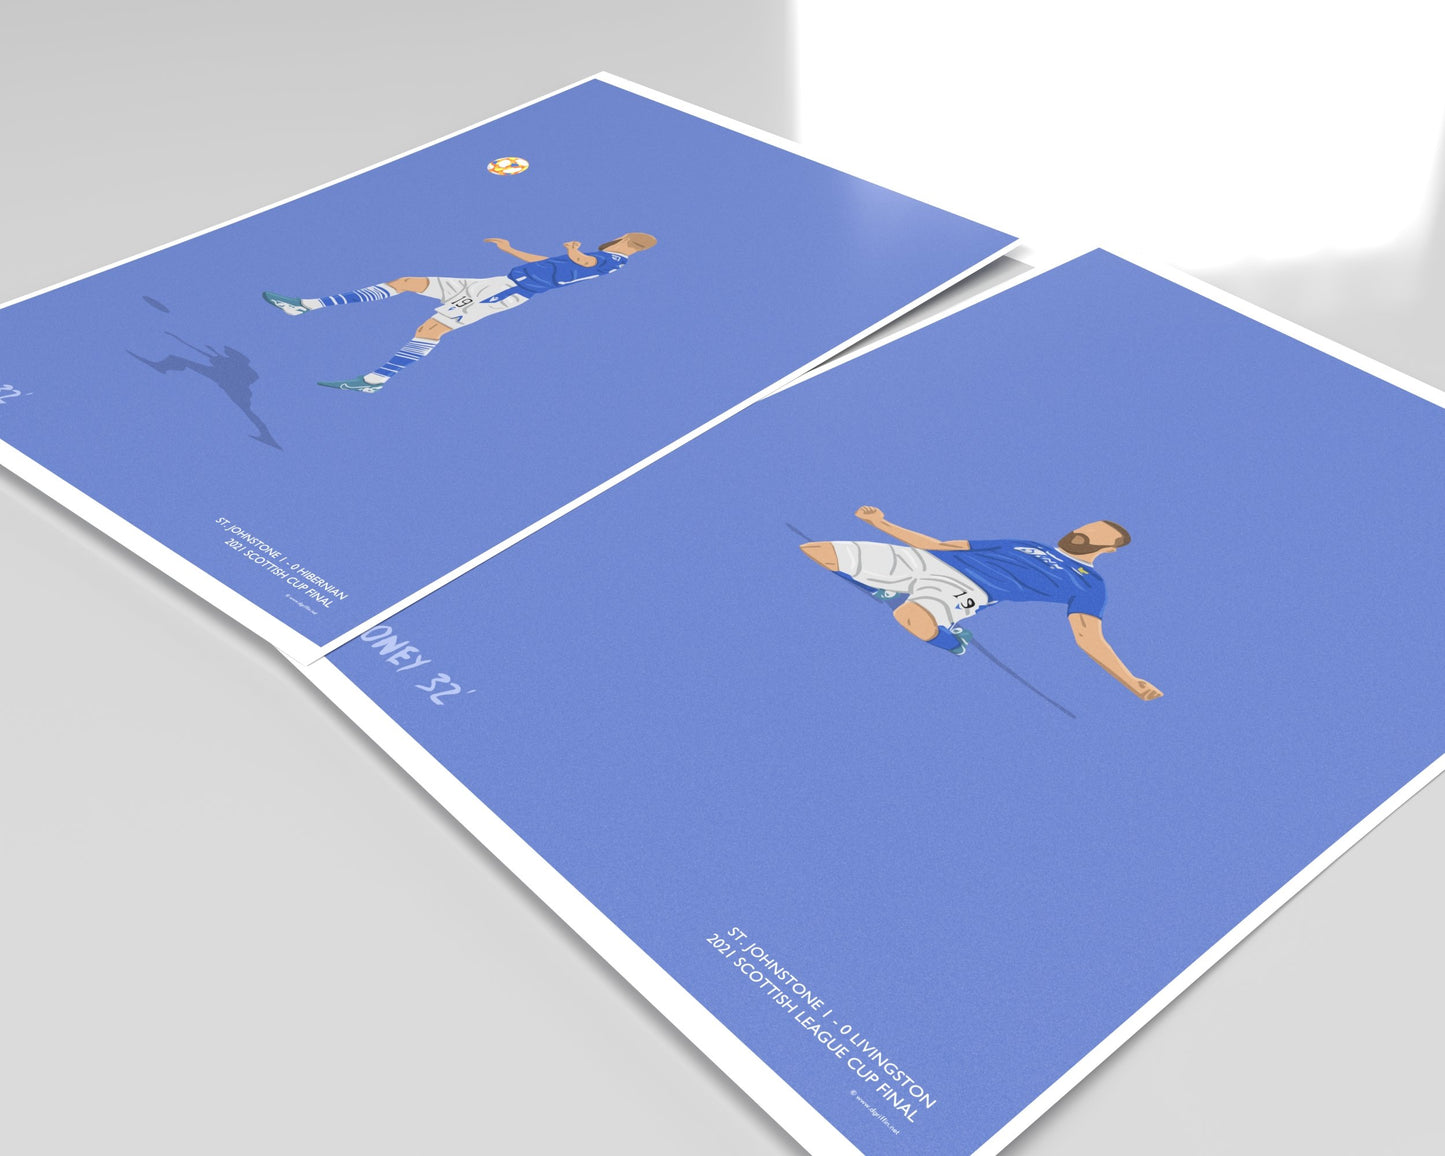 St Johnstone Cup Double Prints - North Section